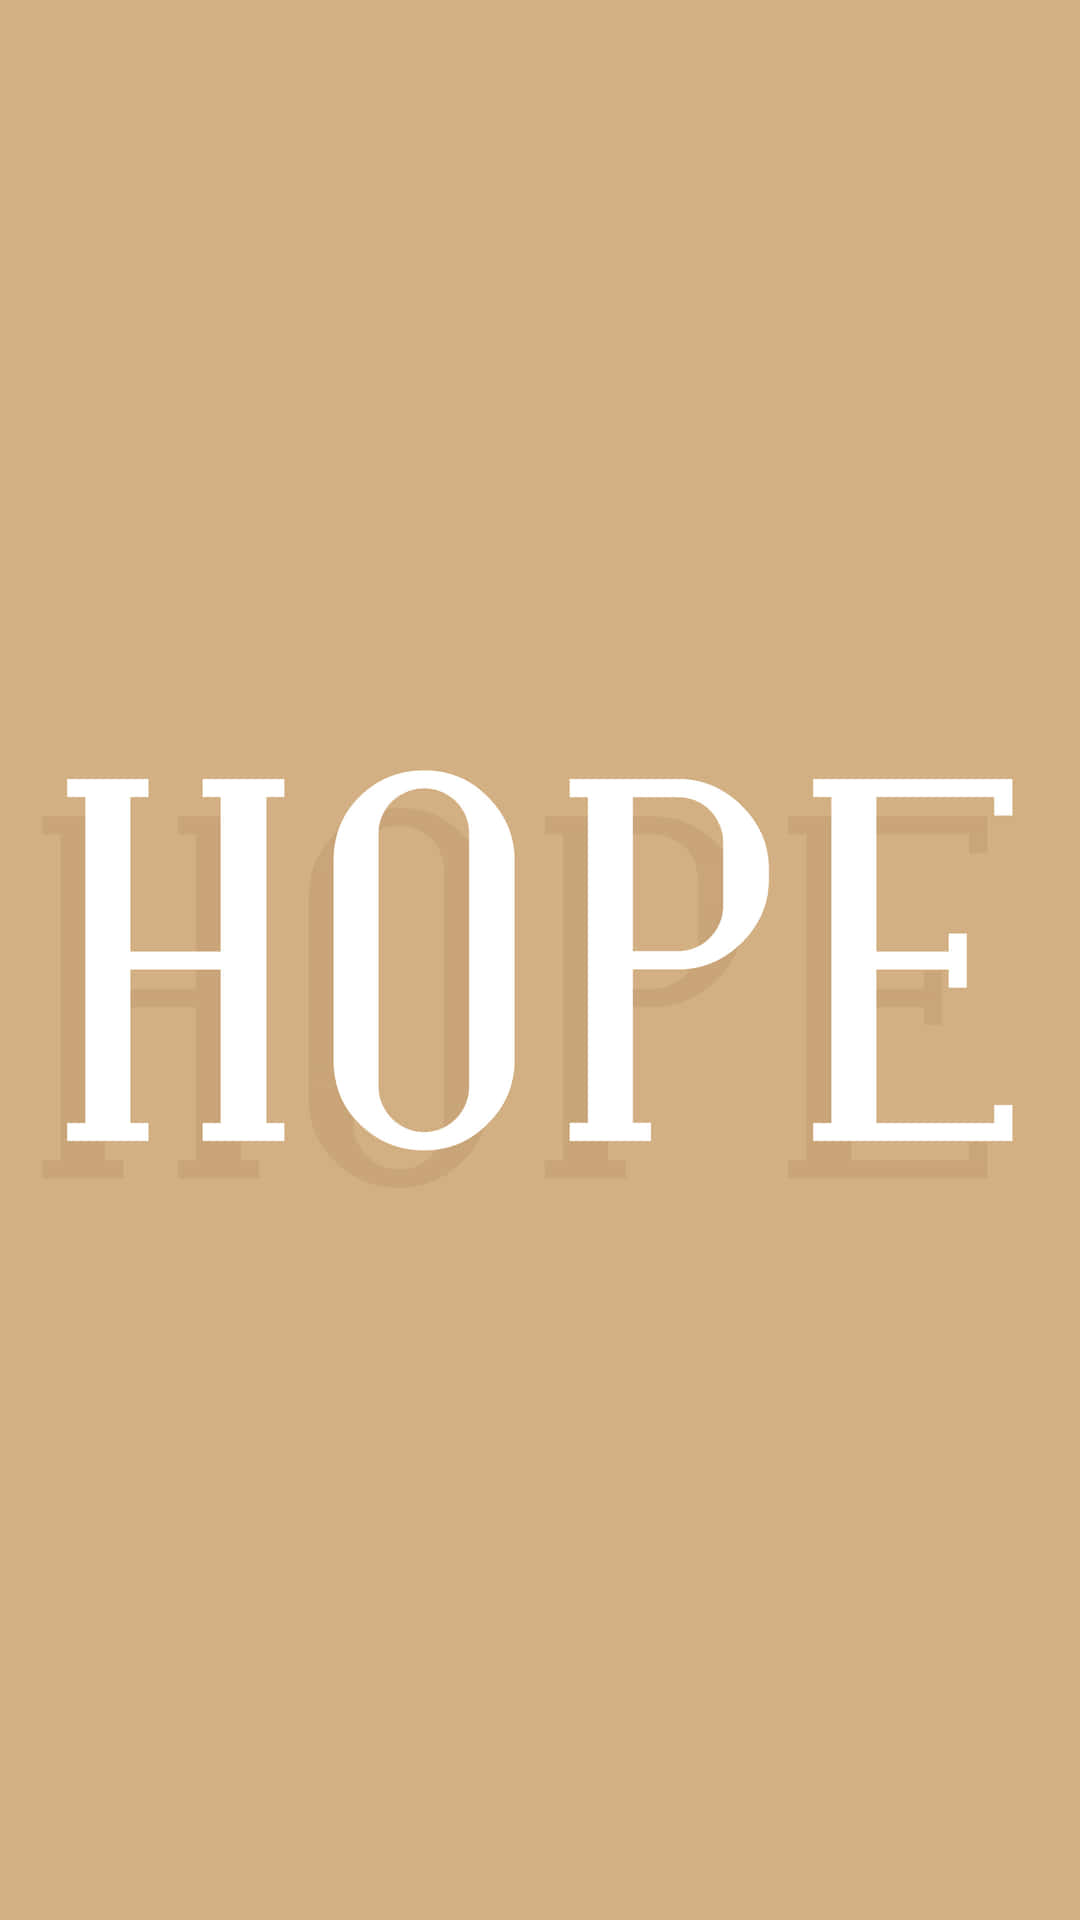 Hope In Light Tan Backdrop Picture